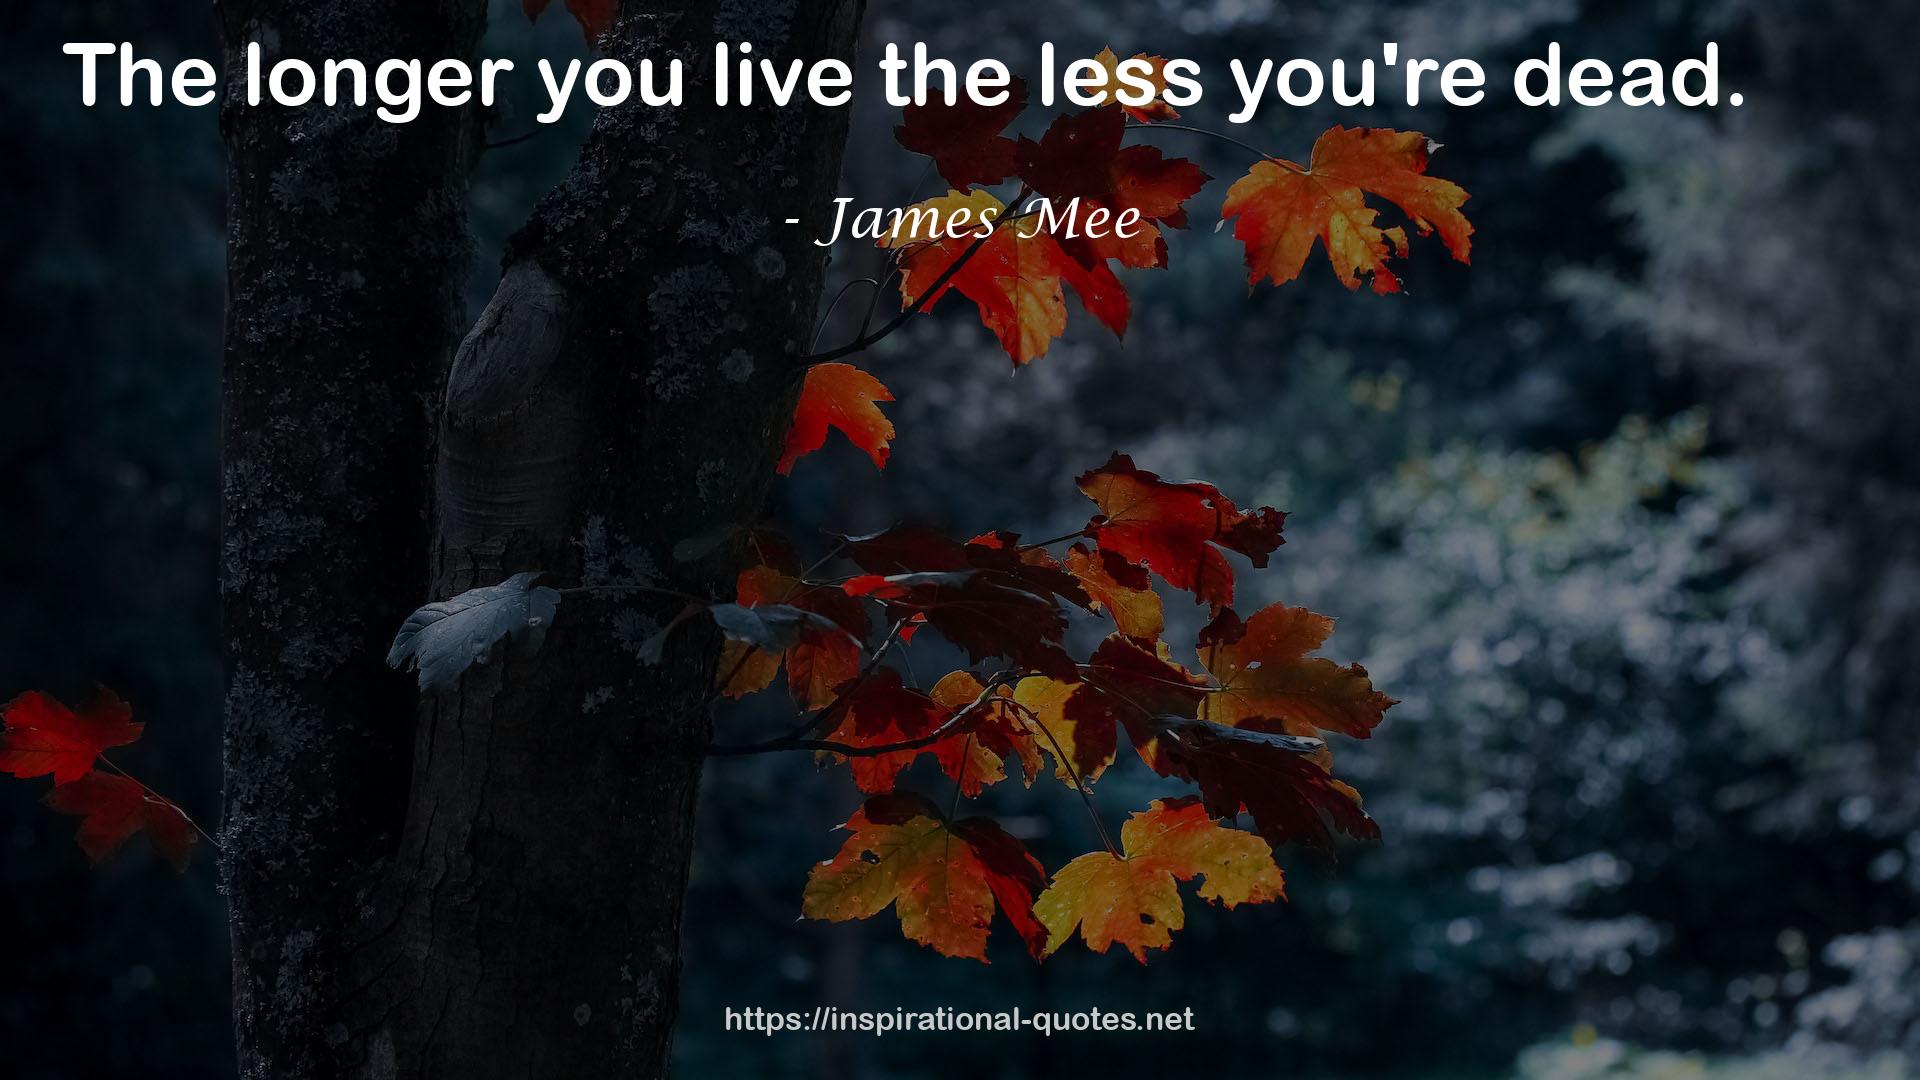 James Mee QUOTES